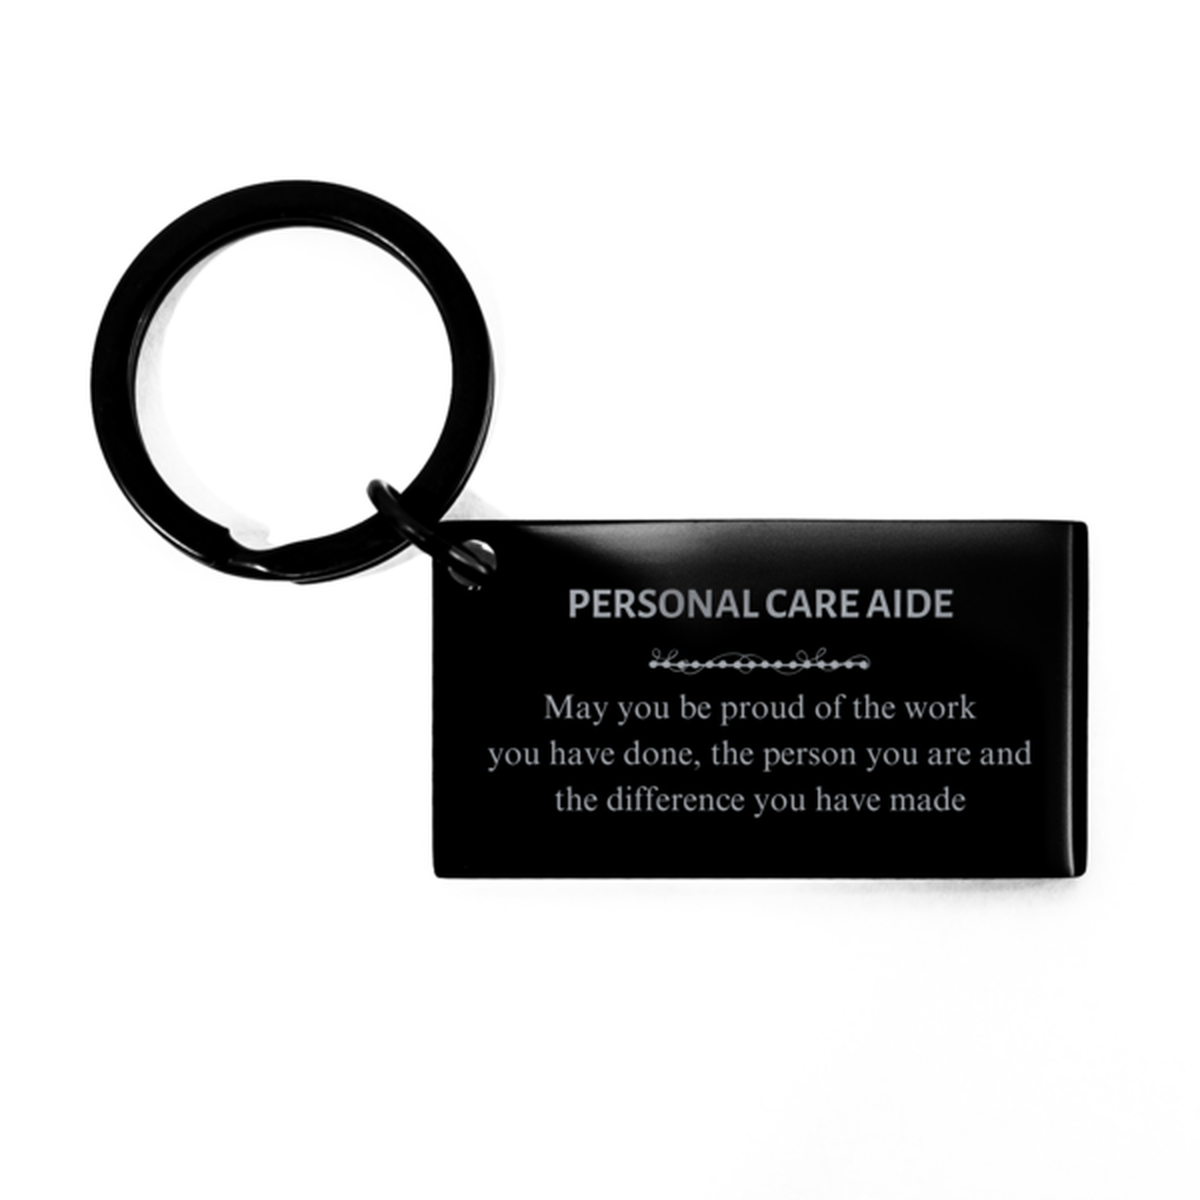 Registered Nurse May you be proud of the work you have done, Retirement Personal Care Aide Keychain for Colleague Appreciation Gifts Amazing for Personal Care Aide